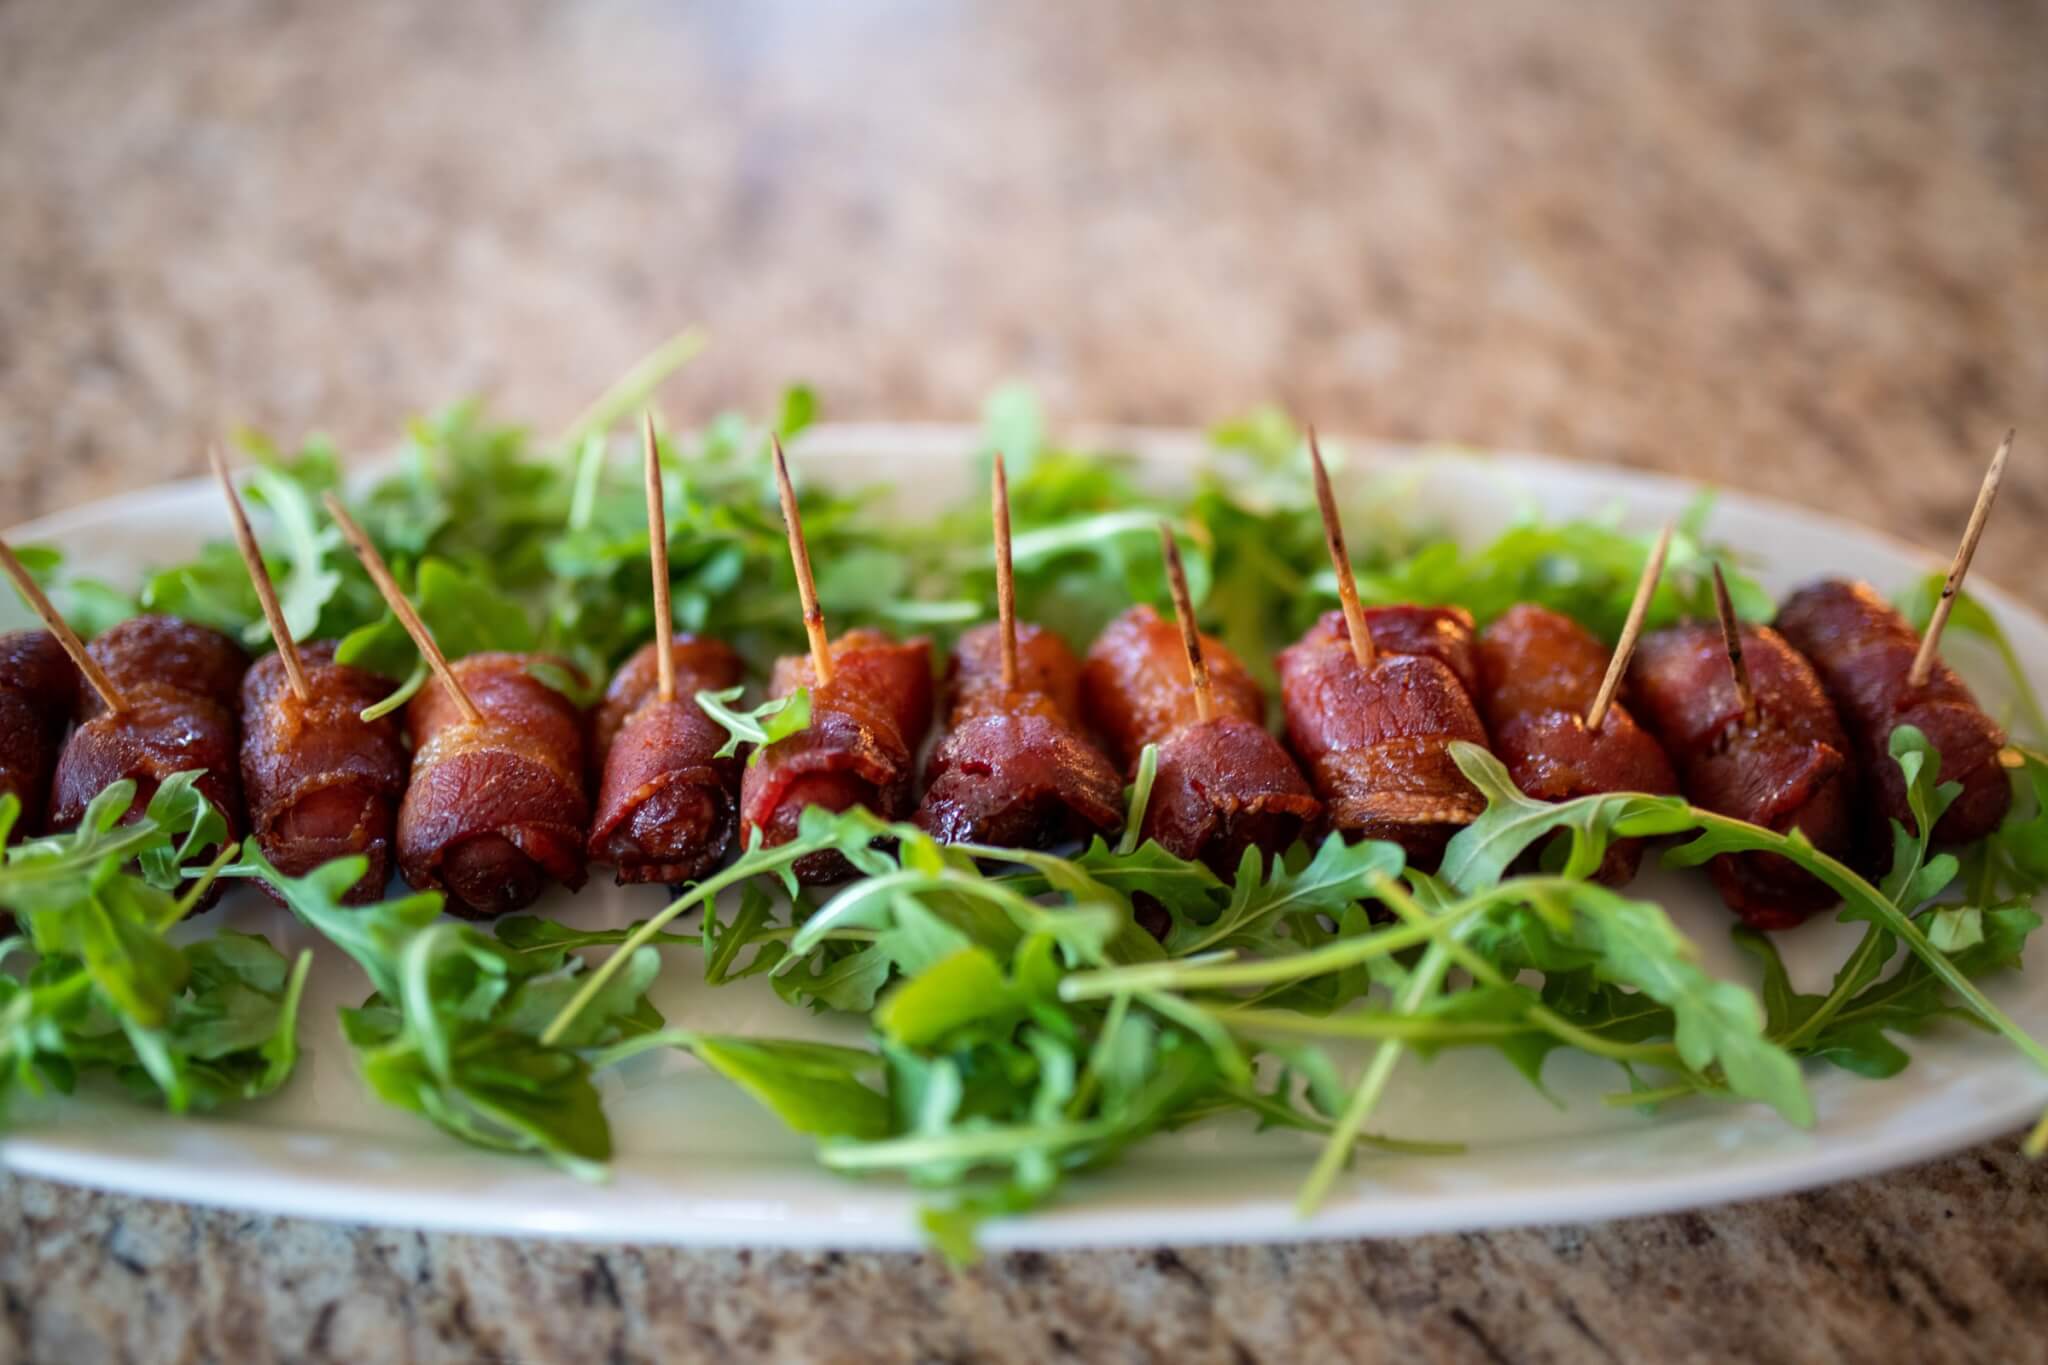 bacon wrapped smokies with brown sugar, game day appetizer, appetizer ideas, easy appetizers, bacon appetizer, smokies appetizer, football party appetizer, superbowl appetizers